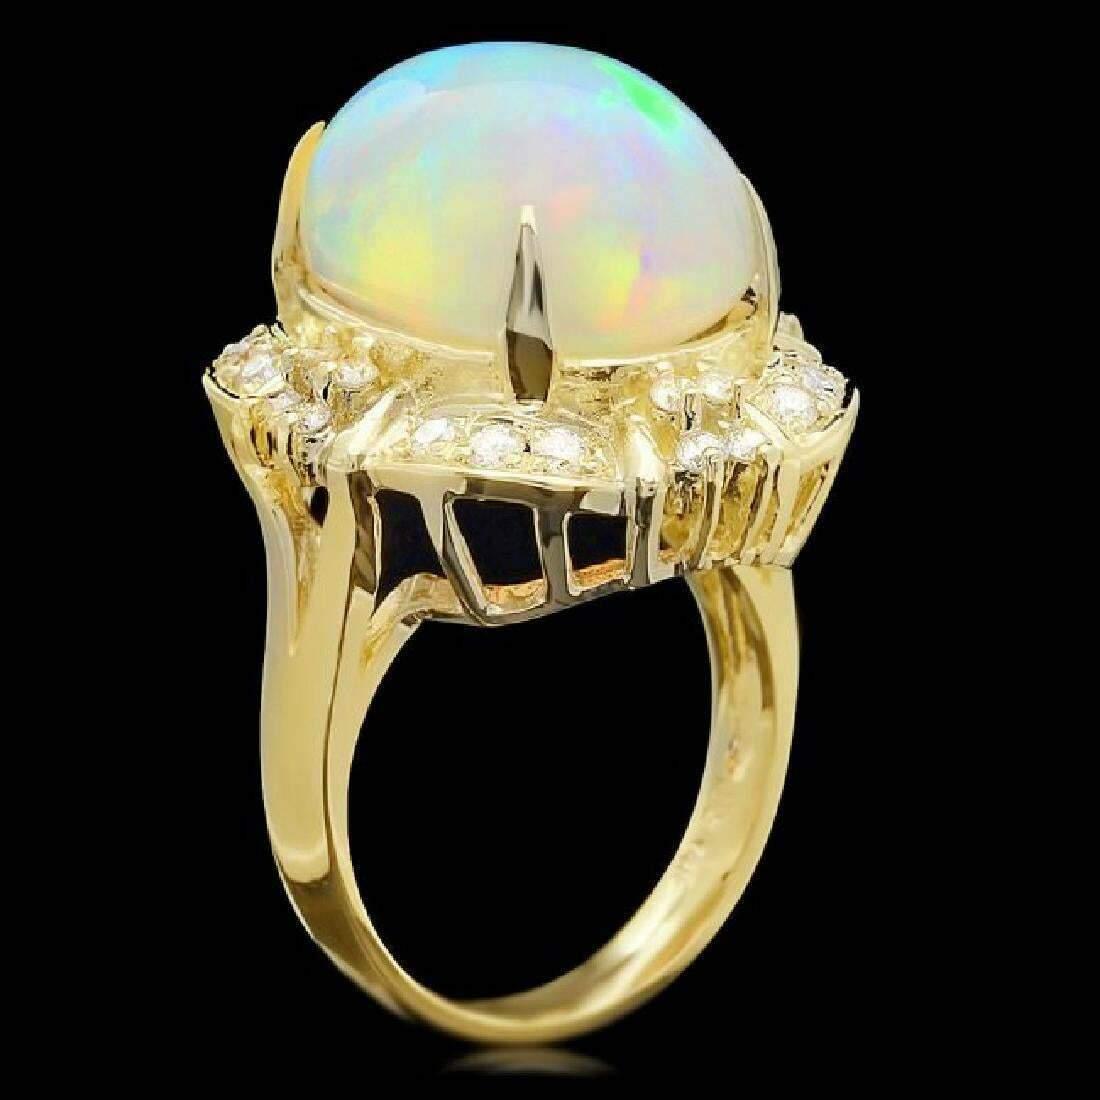 12.70 Carats Natural  Impressive Ethiopian Opal and Diamond 14K Solid Yellow Gold Ring

Total Natural Opal Weight is: Approx. 12.00 Carats

Opal Measures: 18.00x 13.00mm

Total Natural Round Diamonds Weight: Approx. 0.70 Carats (color G-H / Clarity